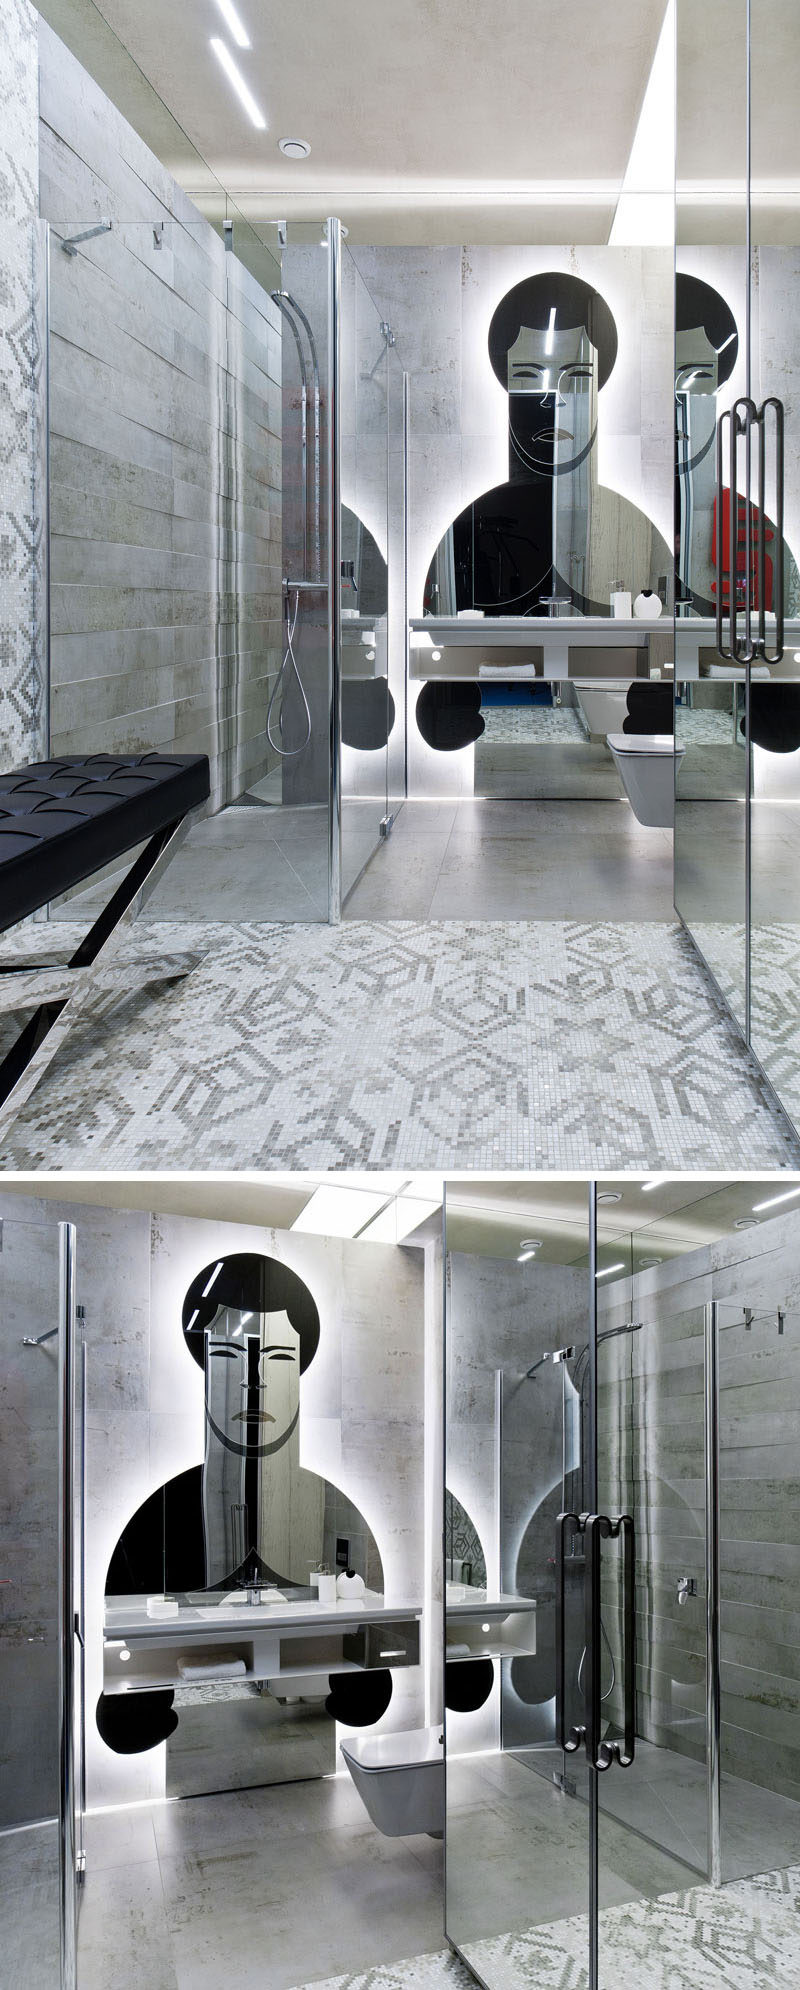 In this modern gym bathroom, mirrored doors and a custom artistic mirror reflect the light in the small space.